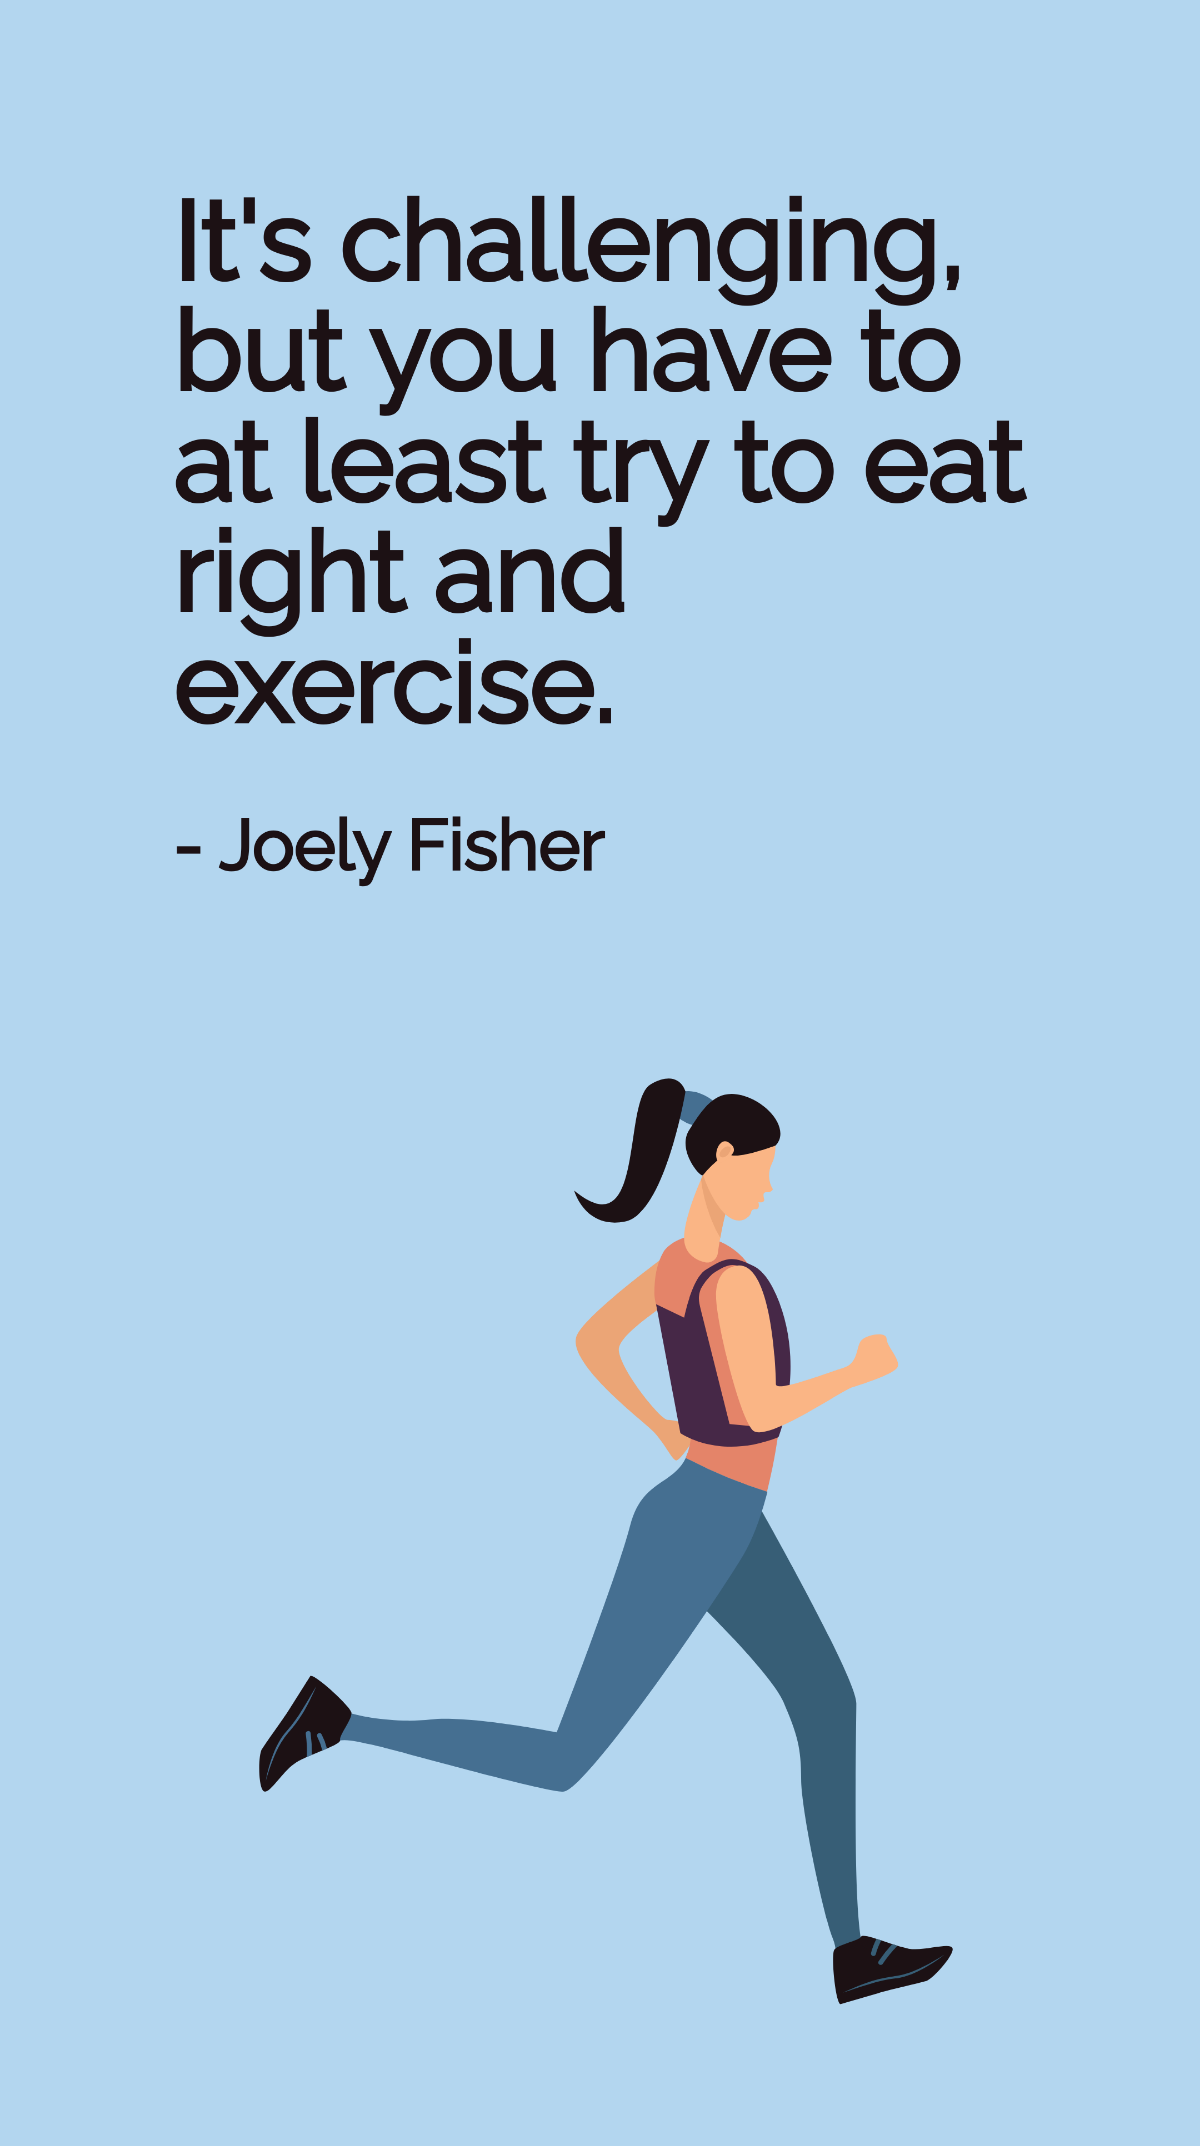 Joely Fisher - It's challenging, but you have to at least try to eat right and exercise. Template